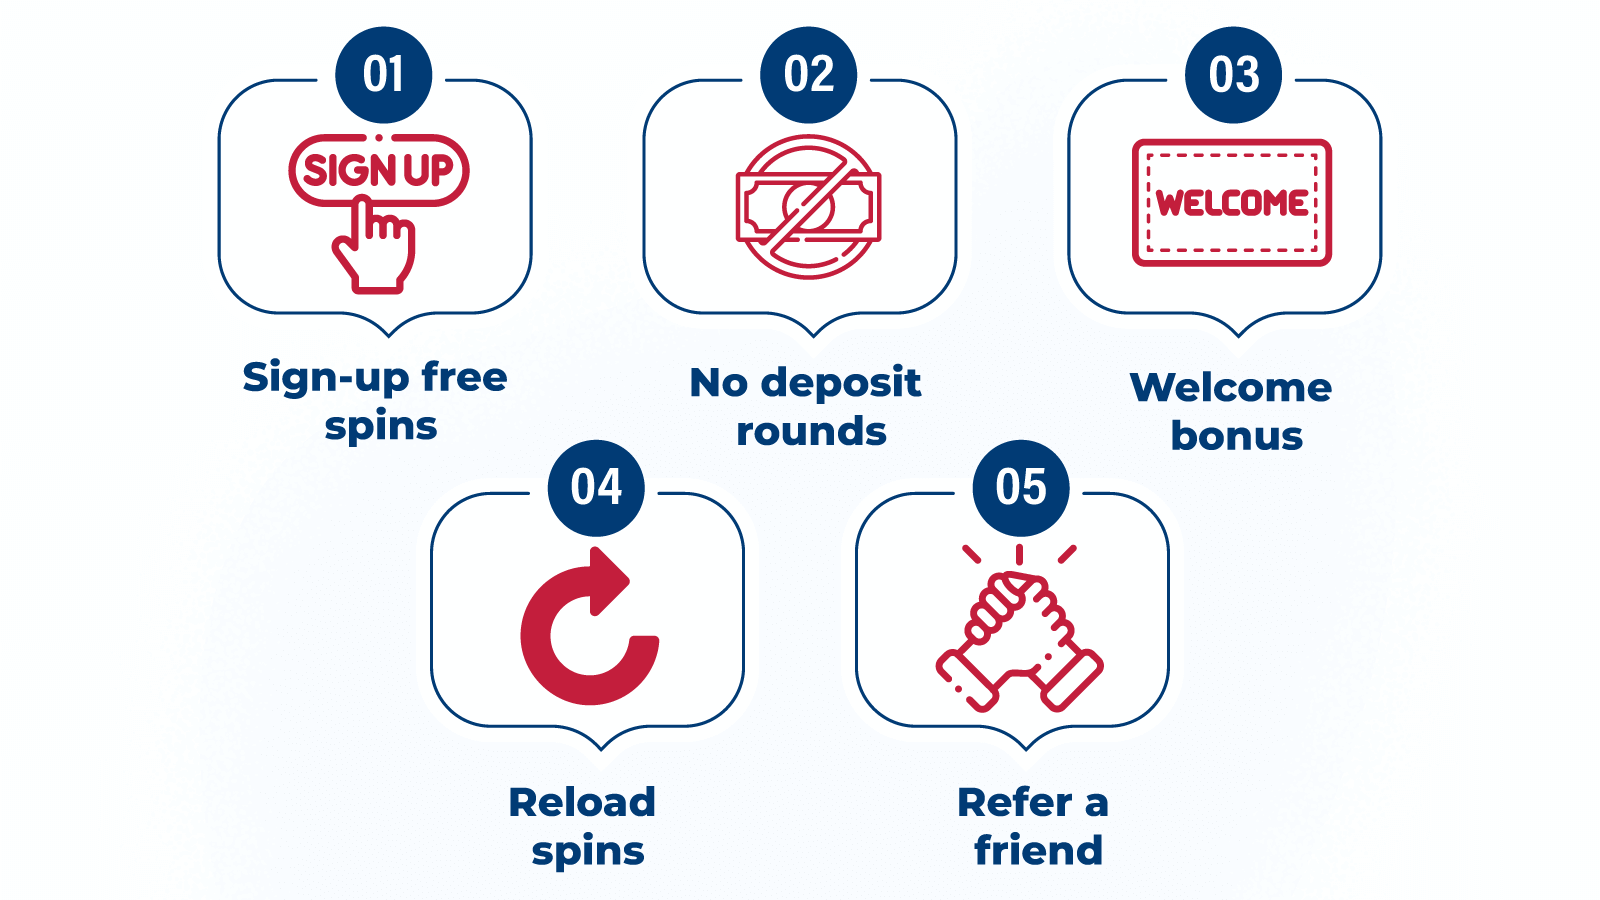 Types of free rounds and how to get them